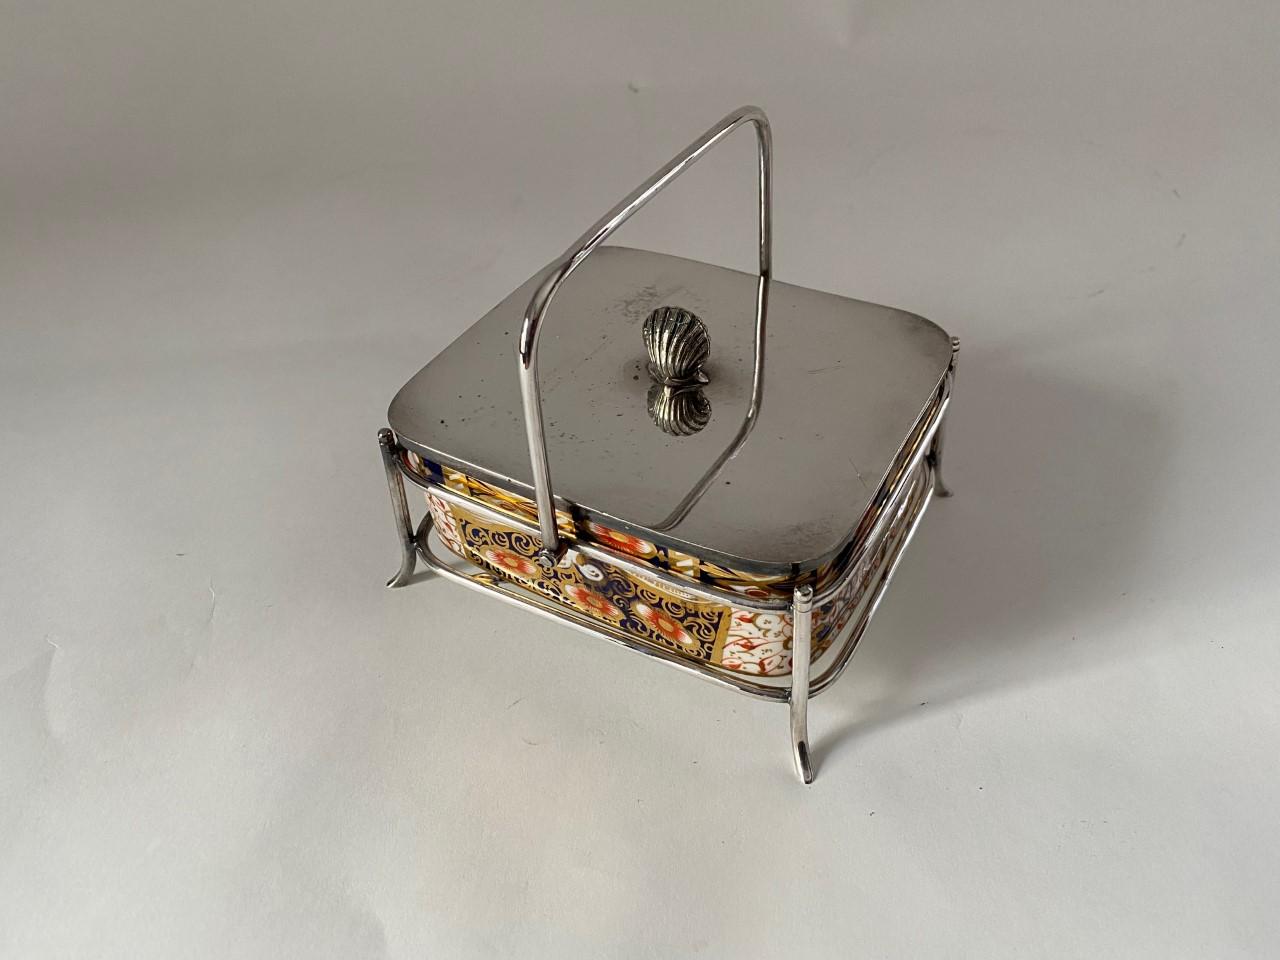 Attractive Old Davenport Porcelain Butter Dish with Silver Plate Cover with Shell Detail in a Silver Plate Stand from England.